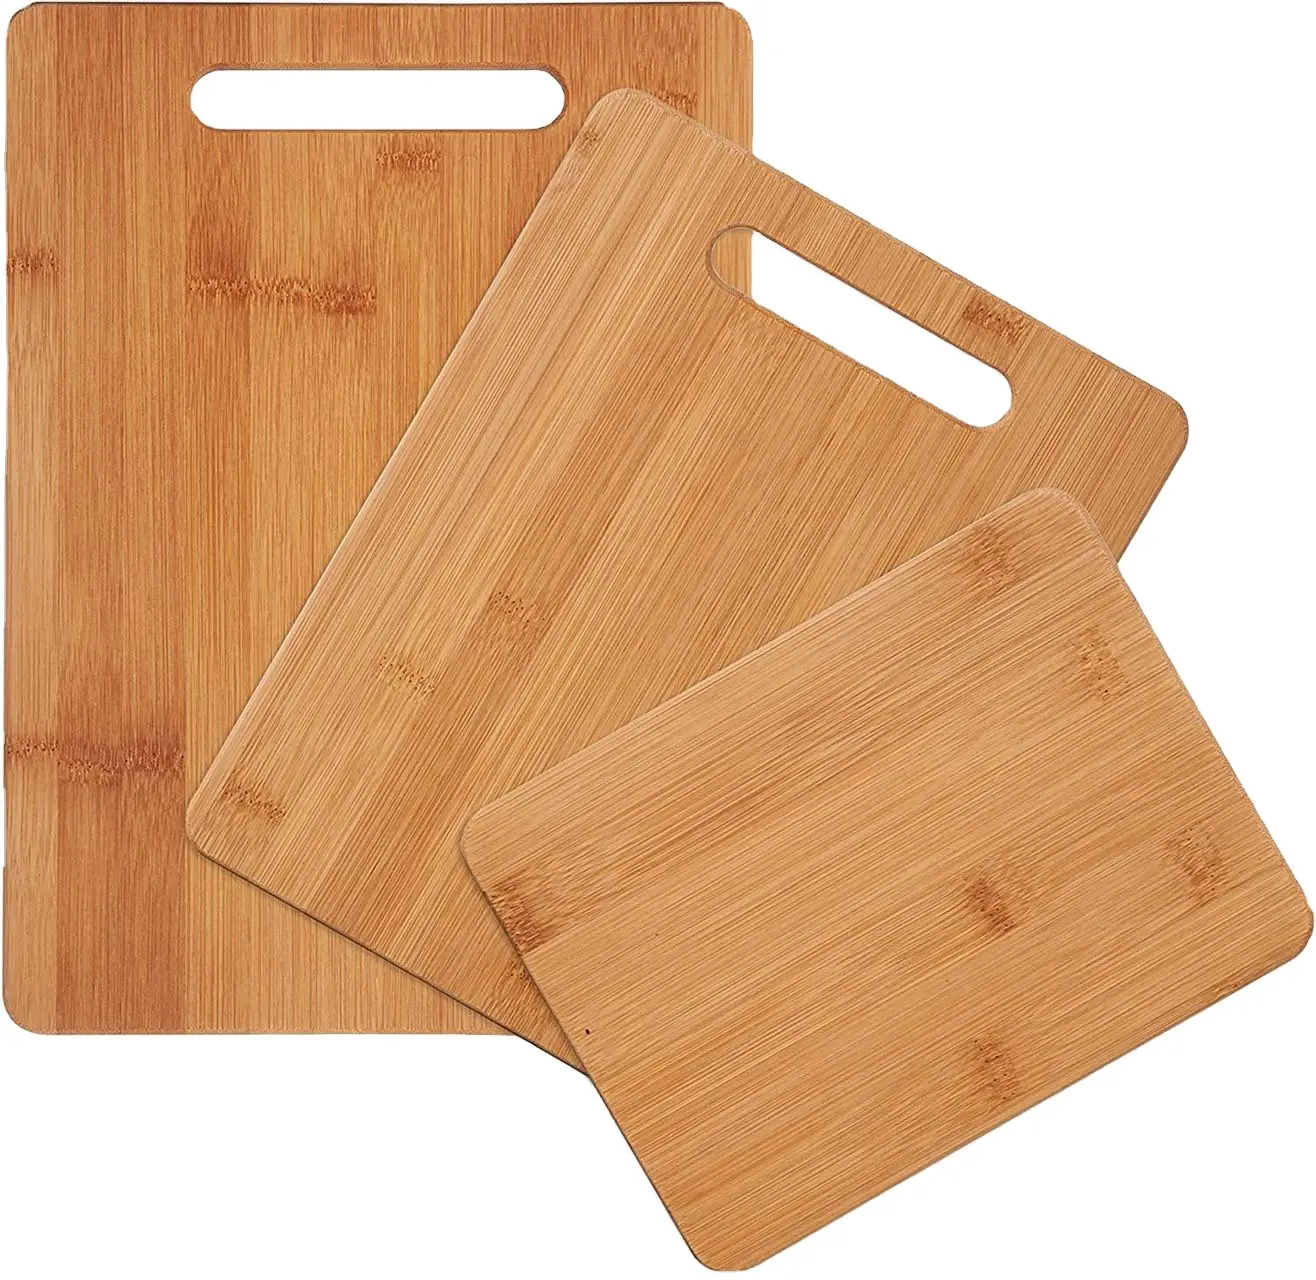 Bamboo Cutting Board Set - Wooden Cutting Boards for Kitchen, Chopping Board for Meat, Vegetables, Fruits, Cheese with Handles